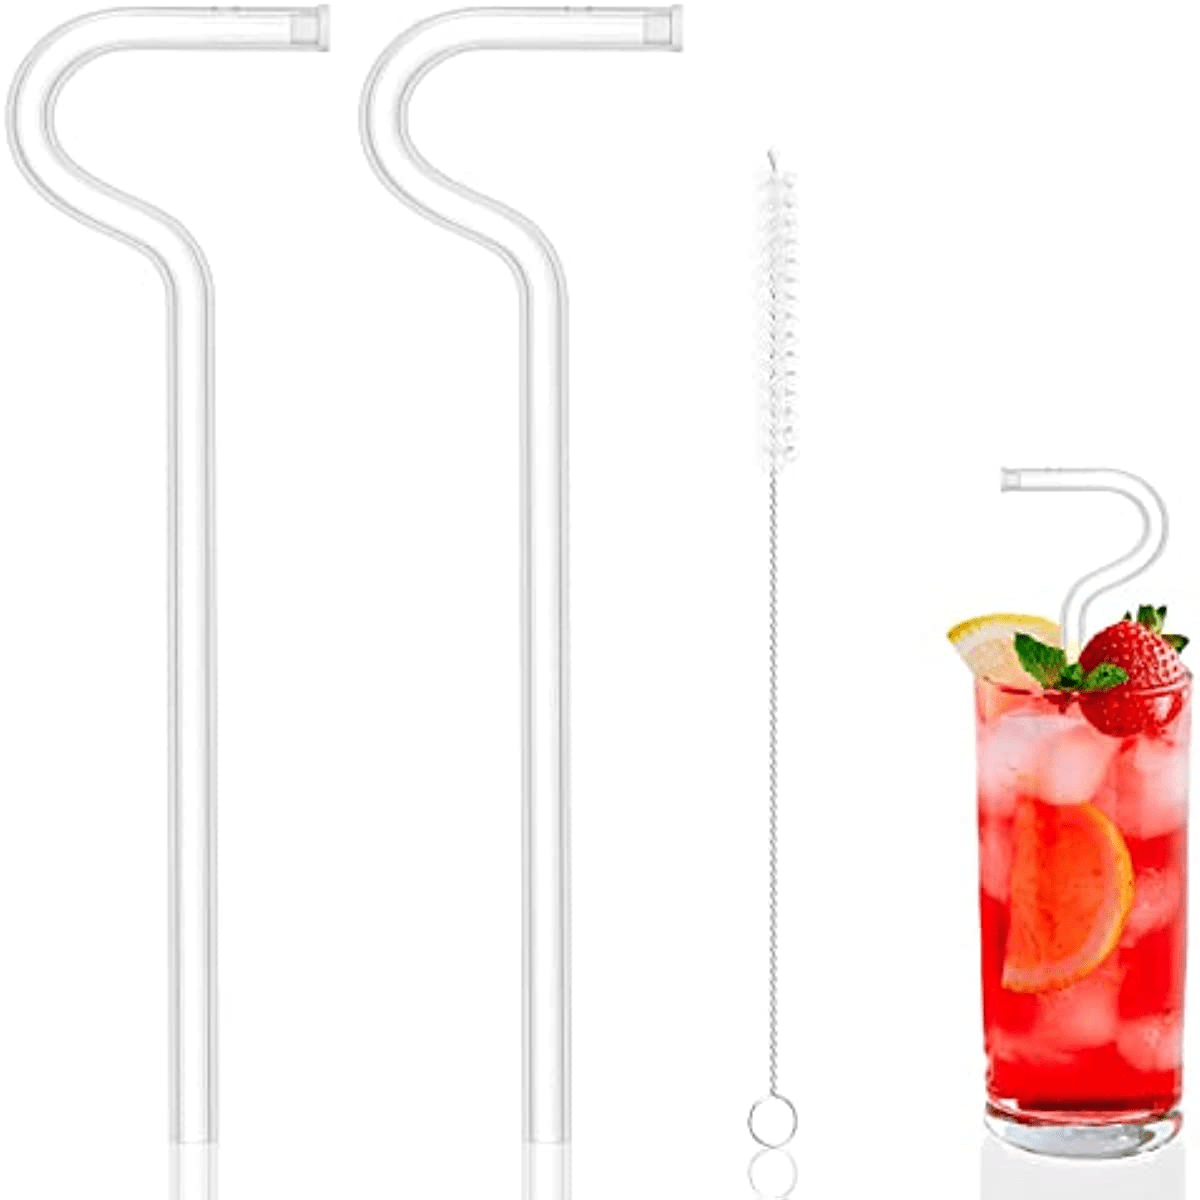 If you have a Stanley cup and want to avoid wrinkles you need this gla, No Wrinkle Straw